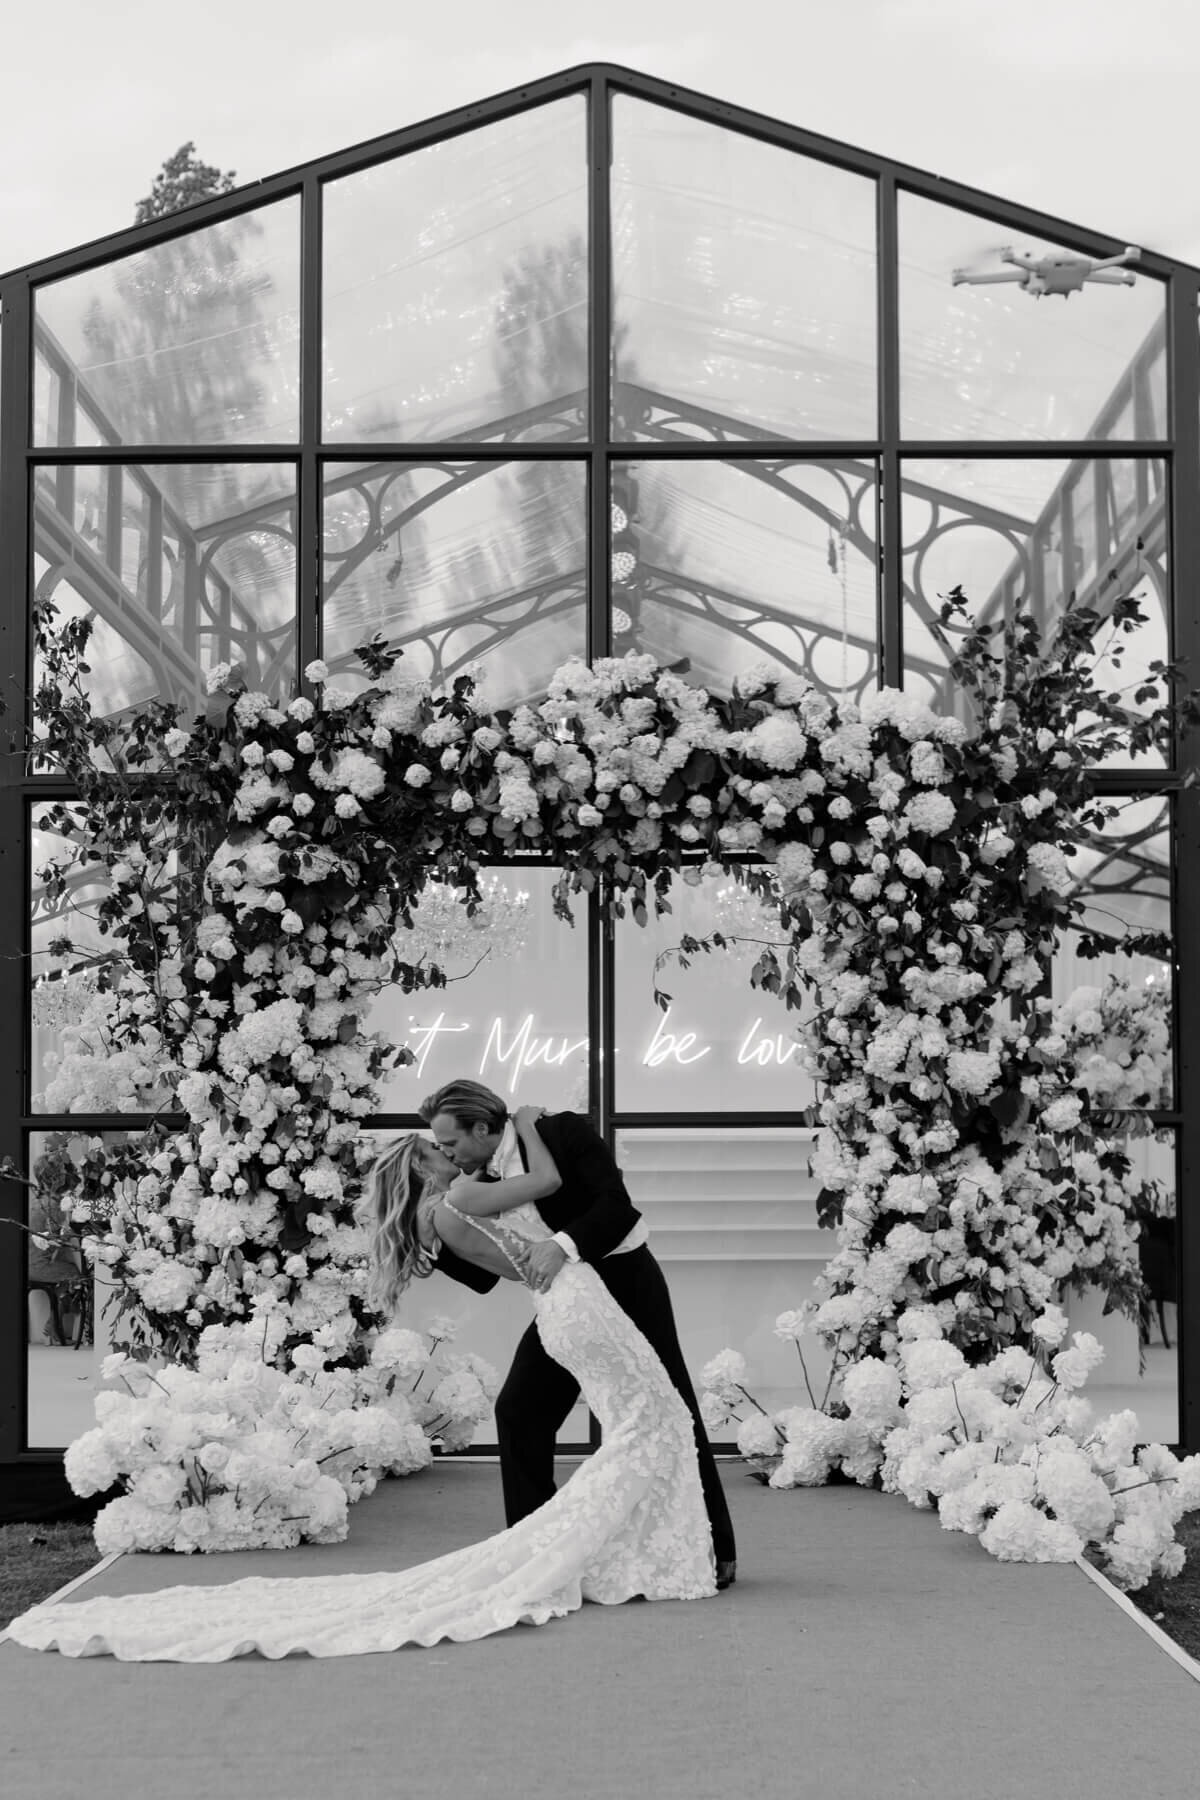 Amelia and Olly Murs in front of their glass wedding marquee with a stunning floral arch entrance.